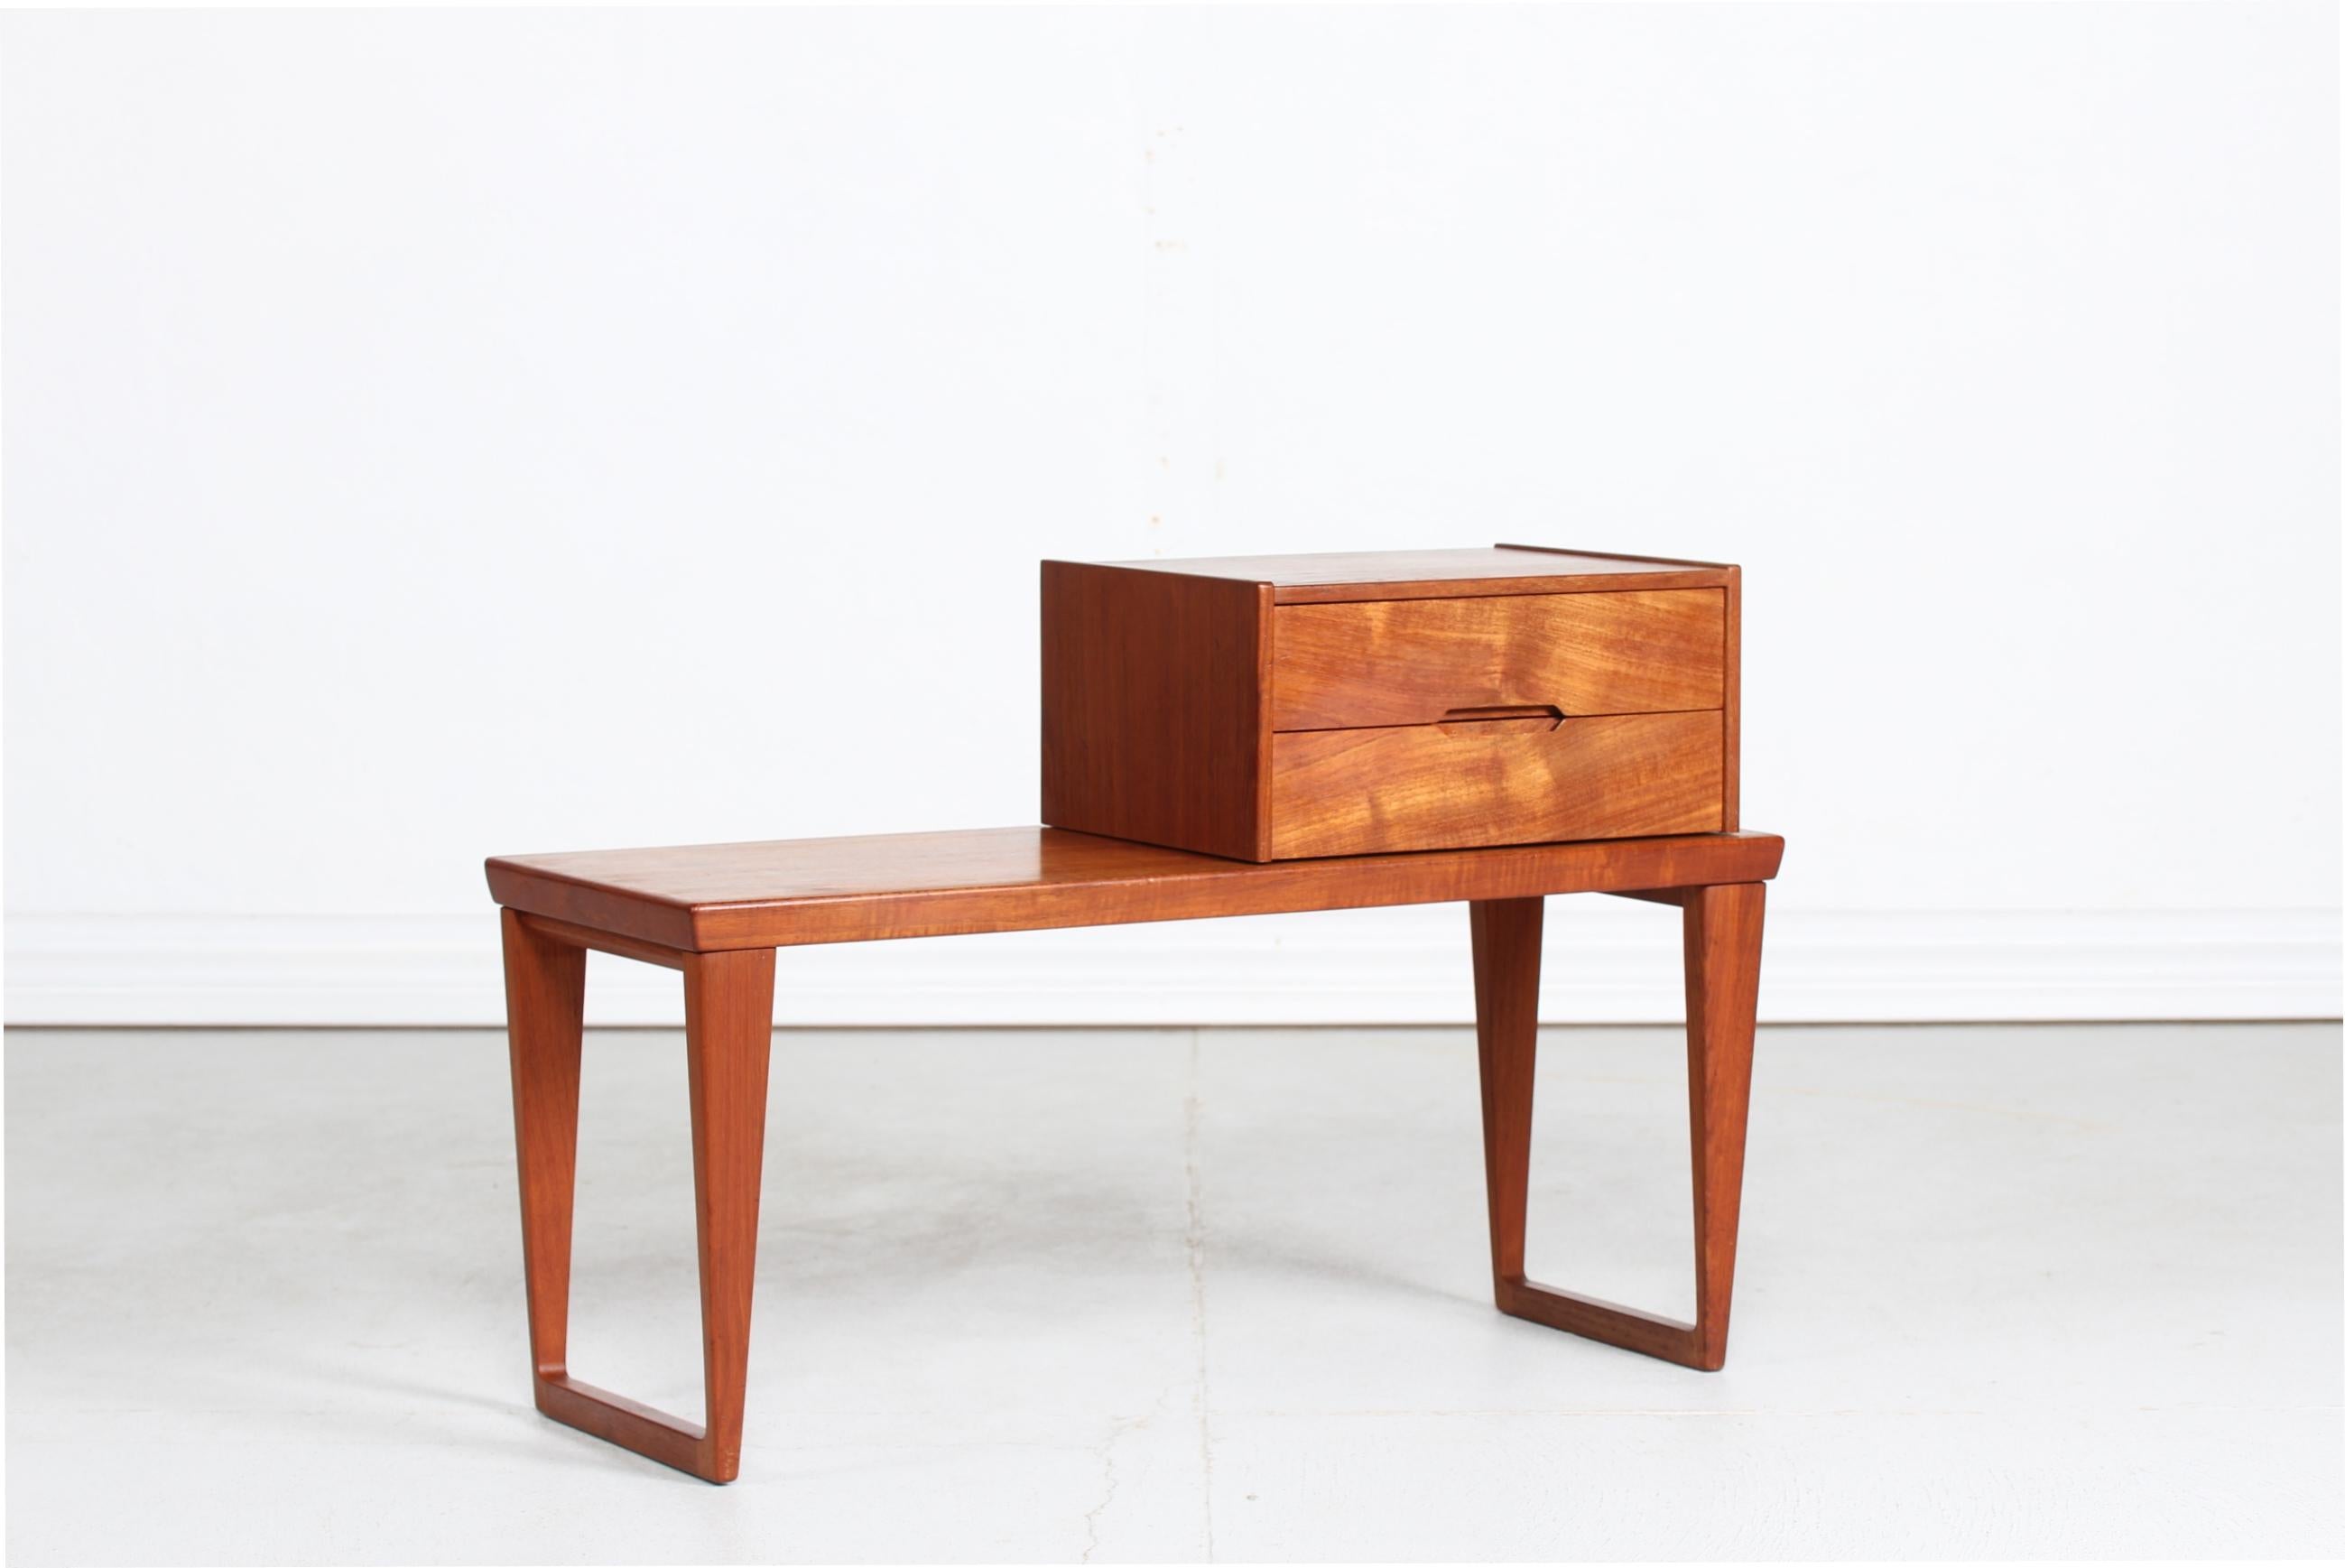 Bench with separate chest of drawers with two drawers design by Danish Aksel Kjersgaard (1925-2018) and Kai Kristiansen (1929-) in the 1960s. 

The furniture are made of teak with oil treatment and manufactured by Aksel Kjersgaards own workshop in